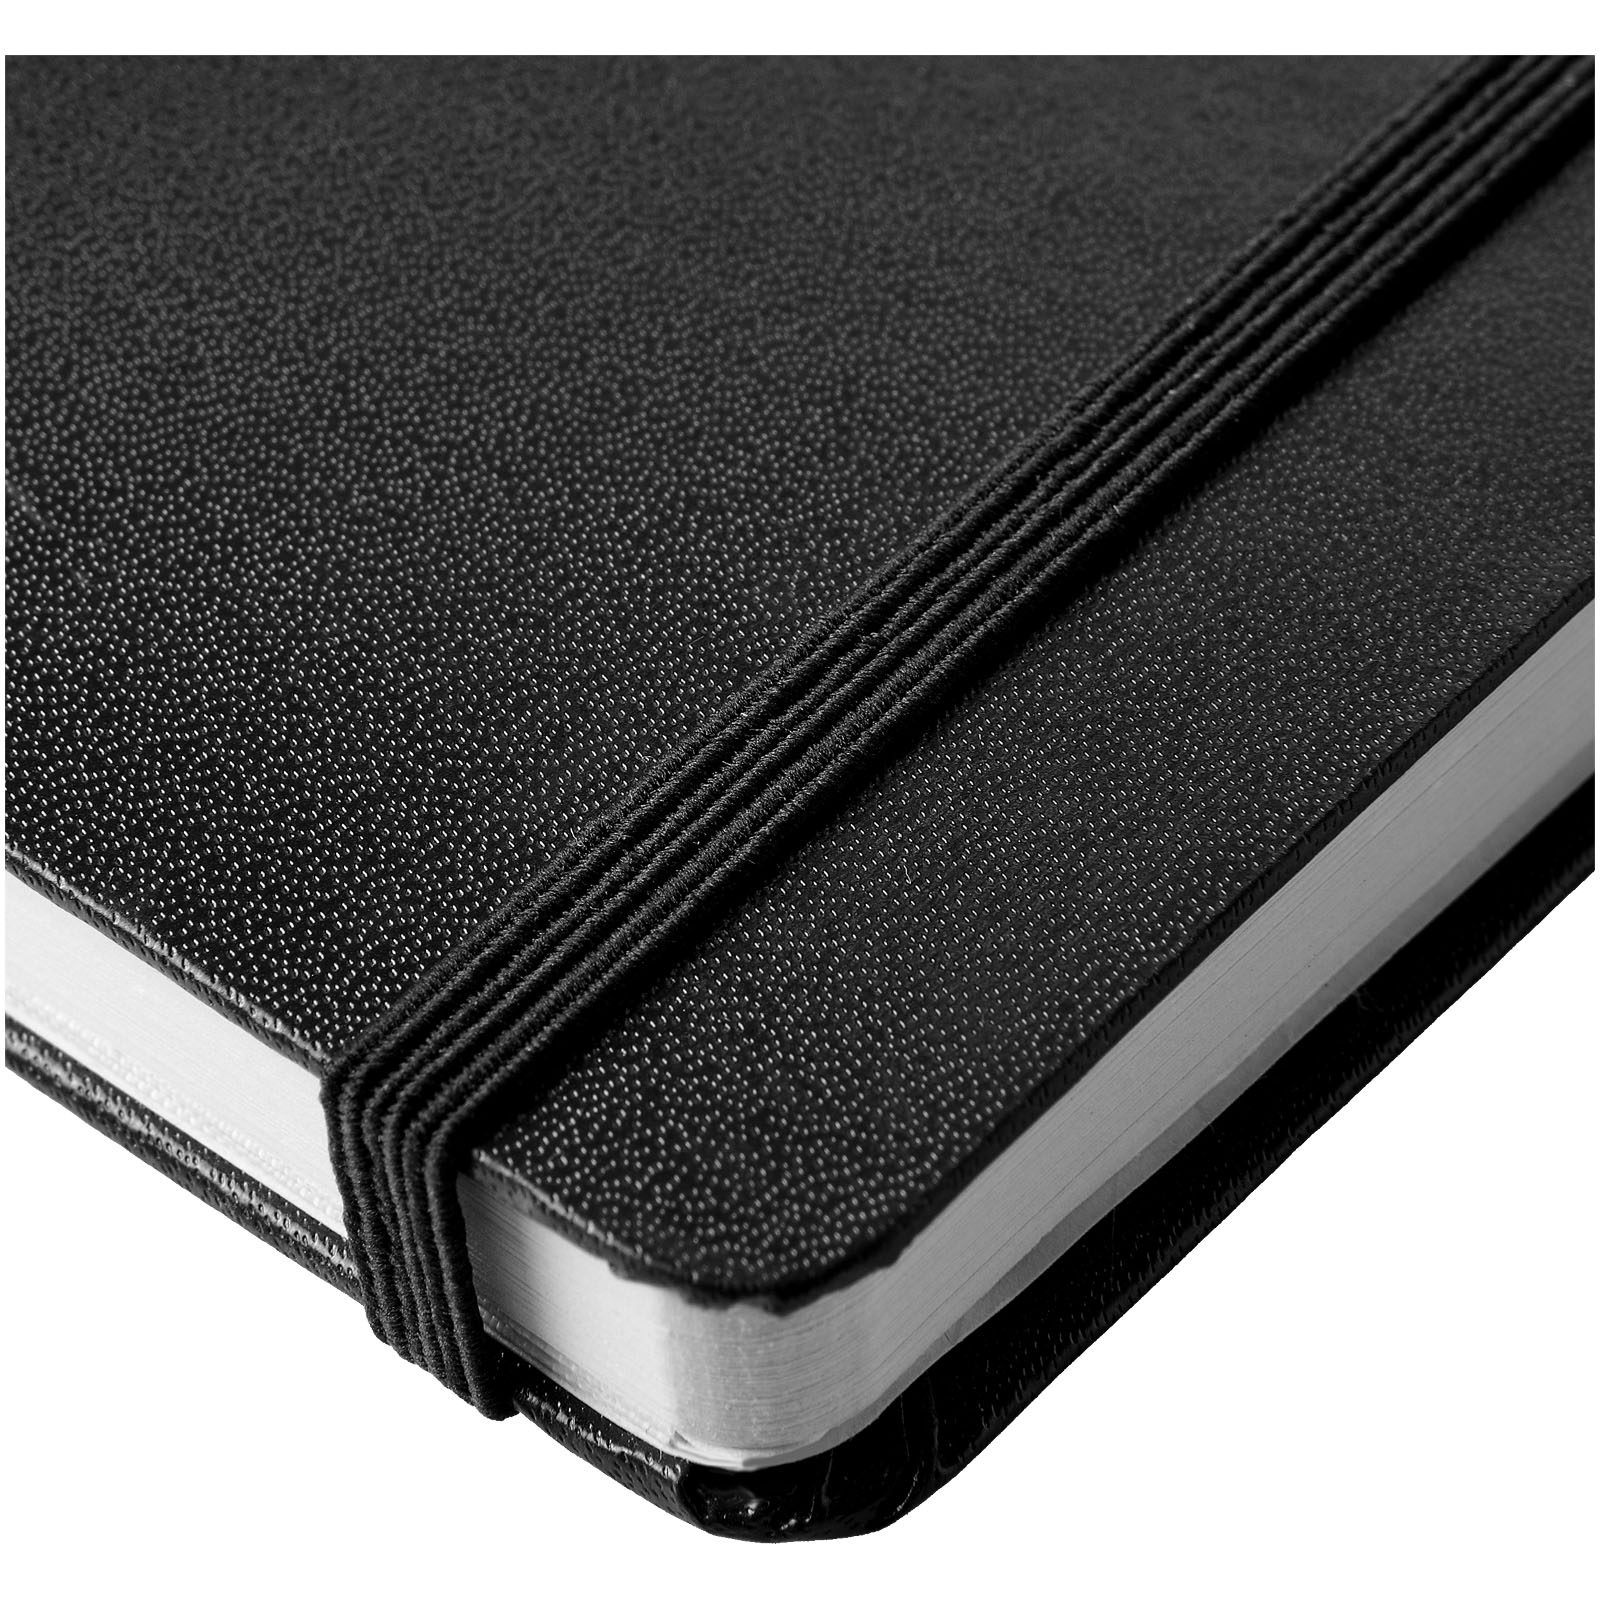 Advertising Hard cover notebooks - Classic A5 hard cover notebook - 5